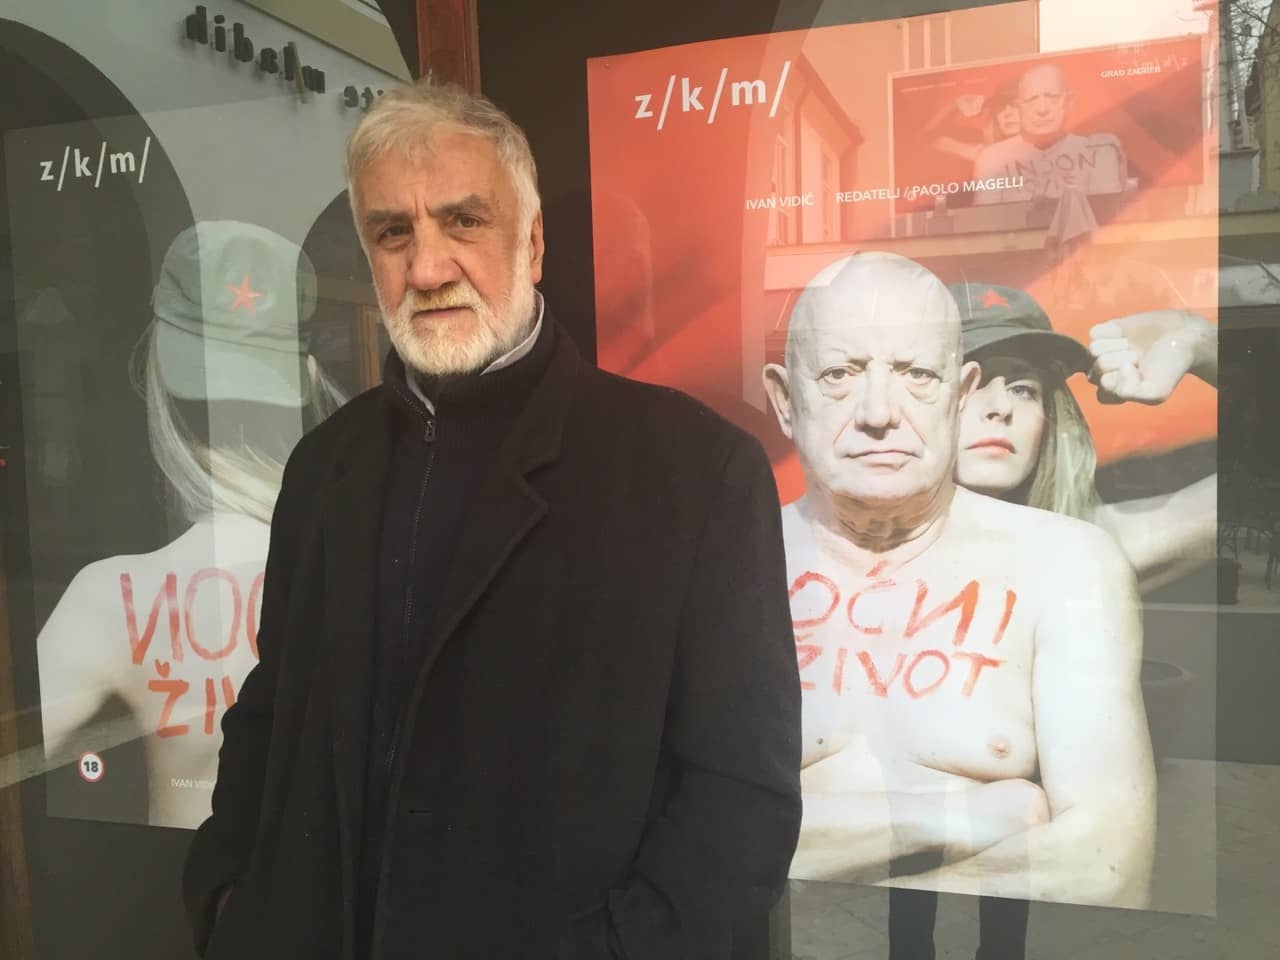 Ljupcho Konstantinov is the recipient of the “Great Star of Macedonian CINEMA” Award presented by the Macedonian Film Professionals’ Association